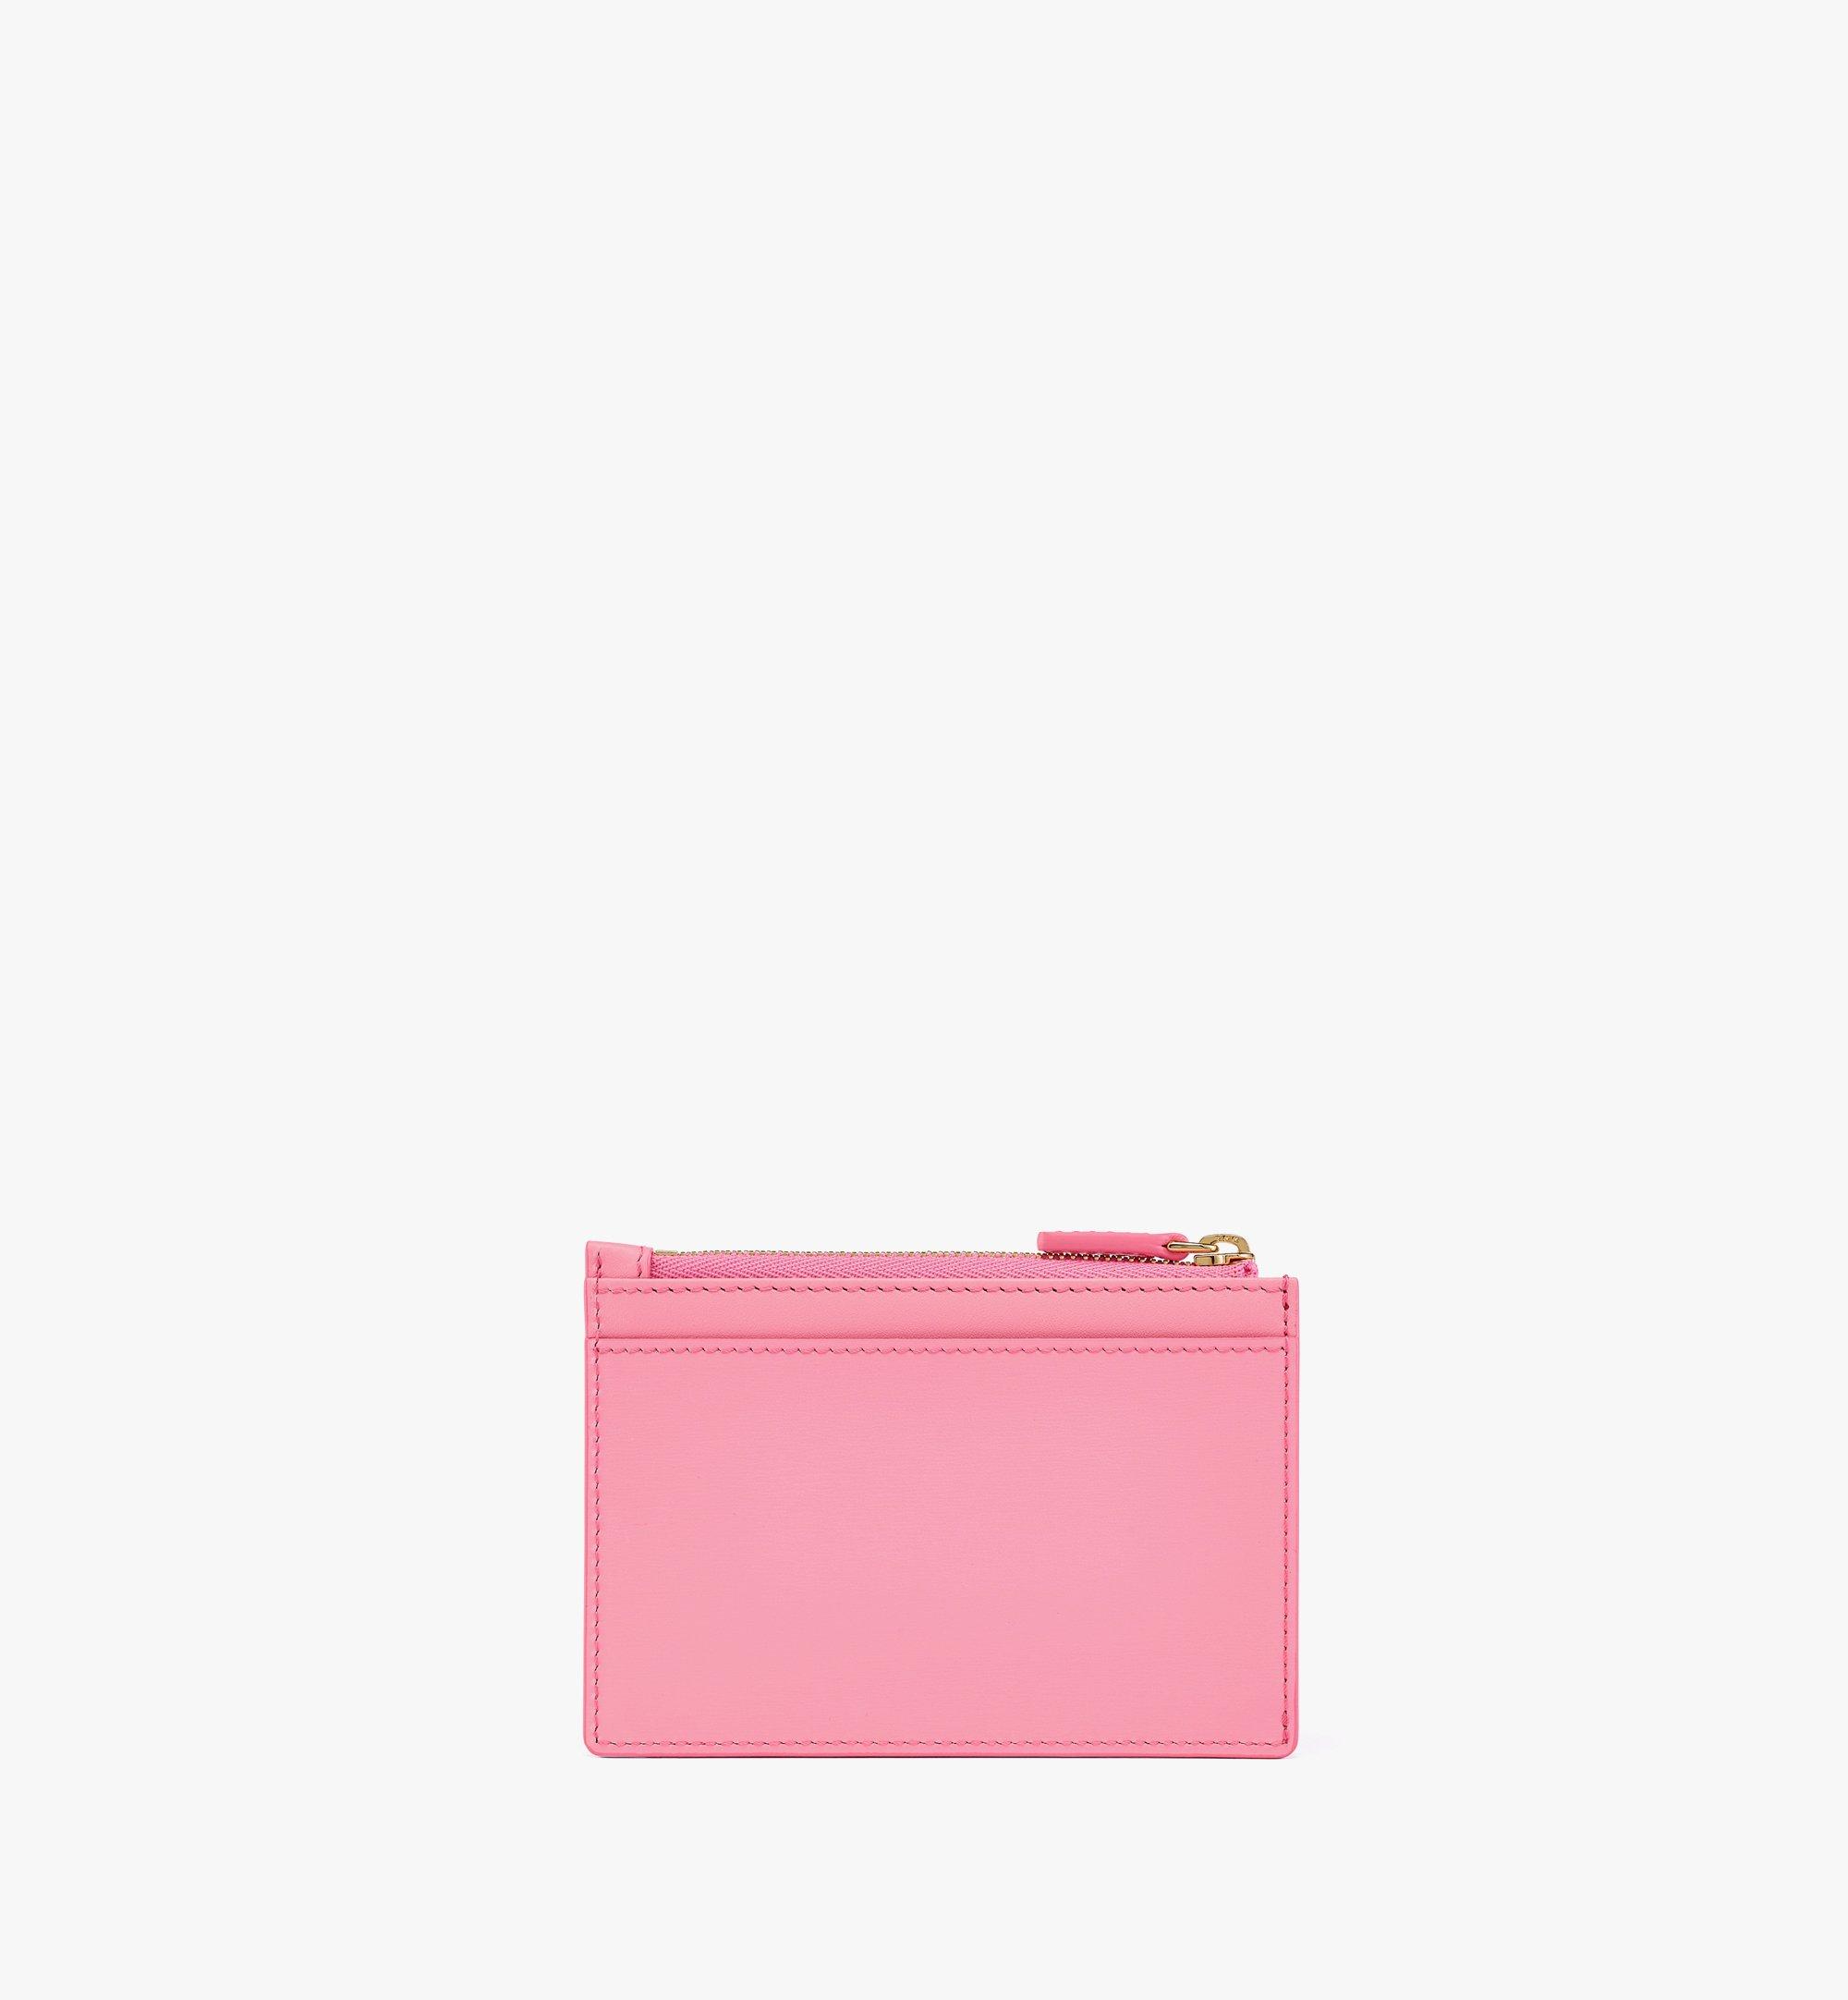 MCM Tracy Card Case in Spanish Leather Pink MYACSPA02QV001 Alternate View 2